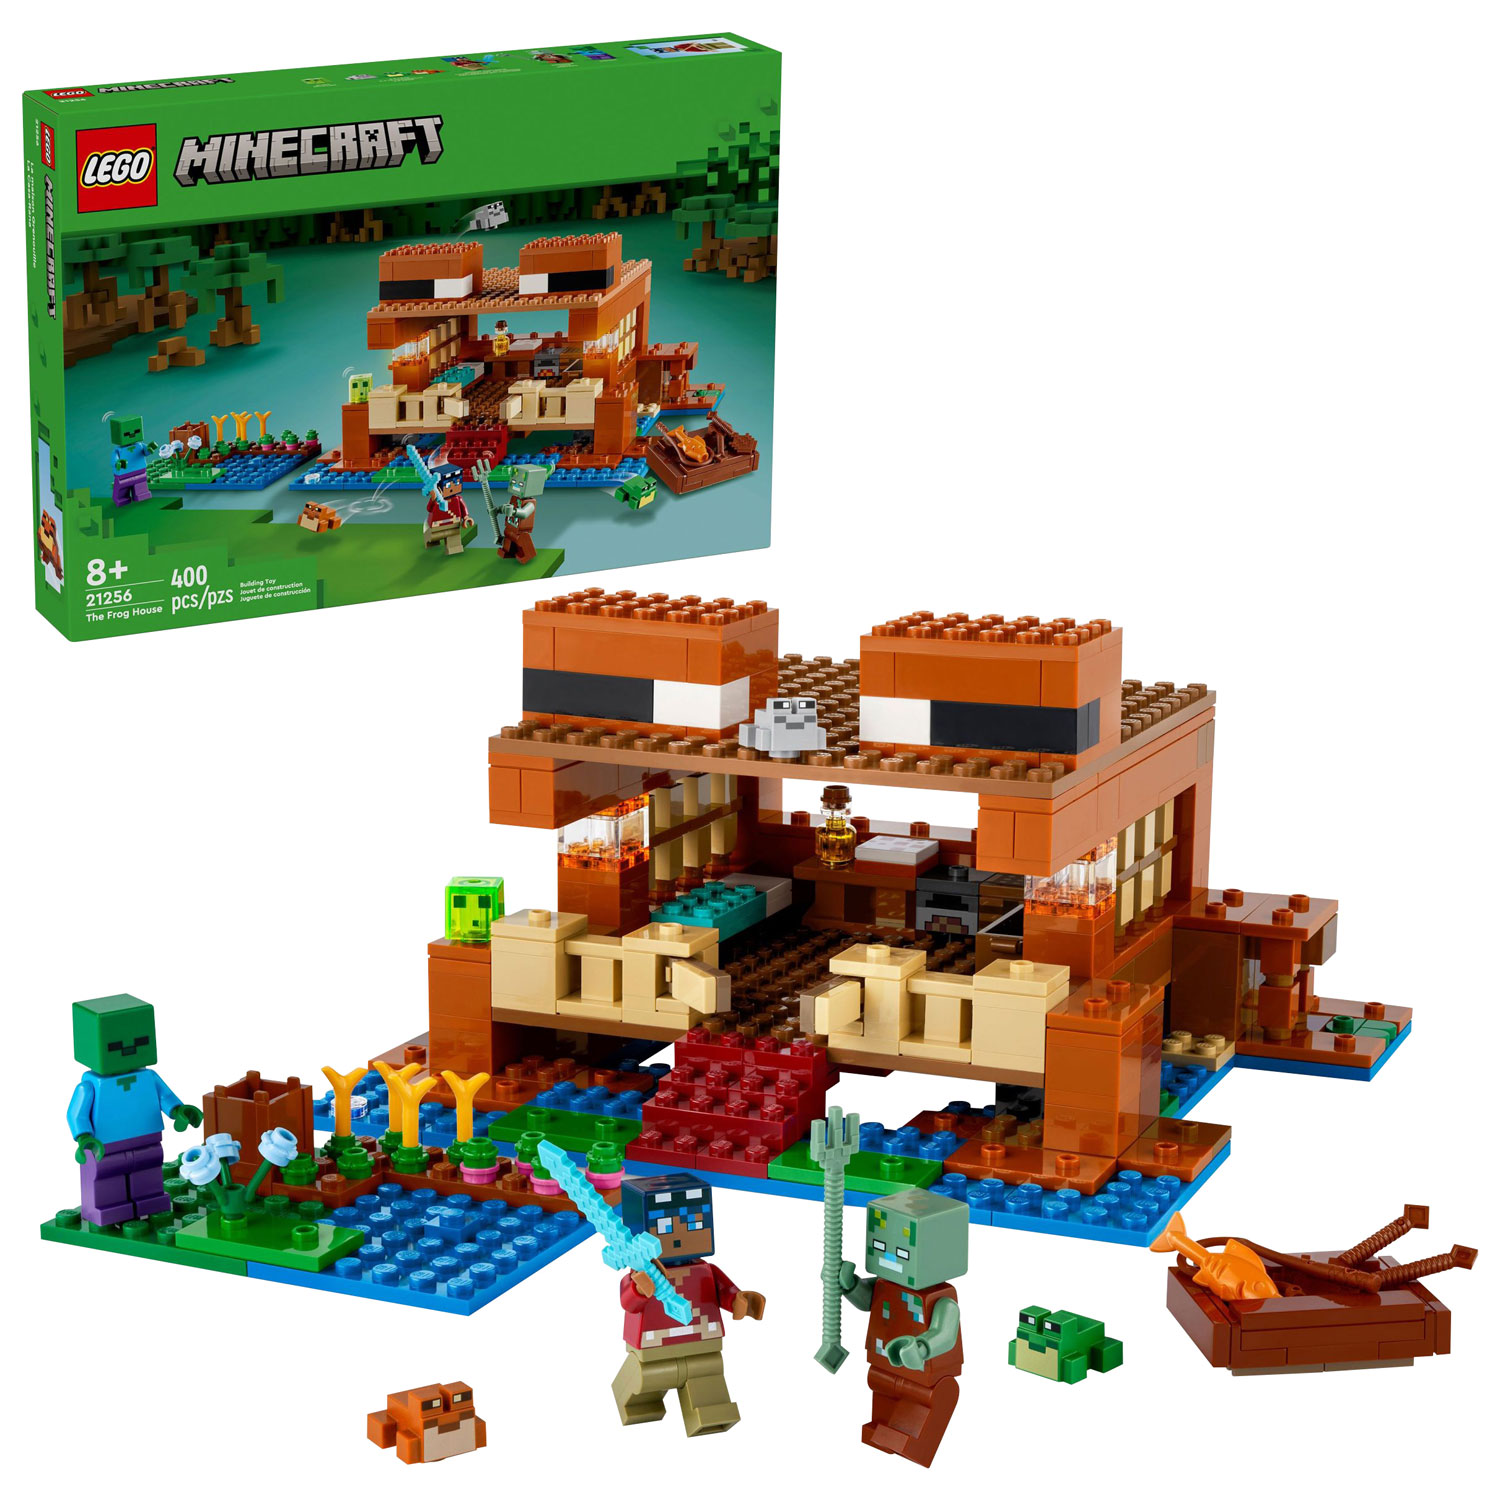 LEGO Minecraft The Frog House - 400 Pieces (21256)